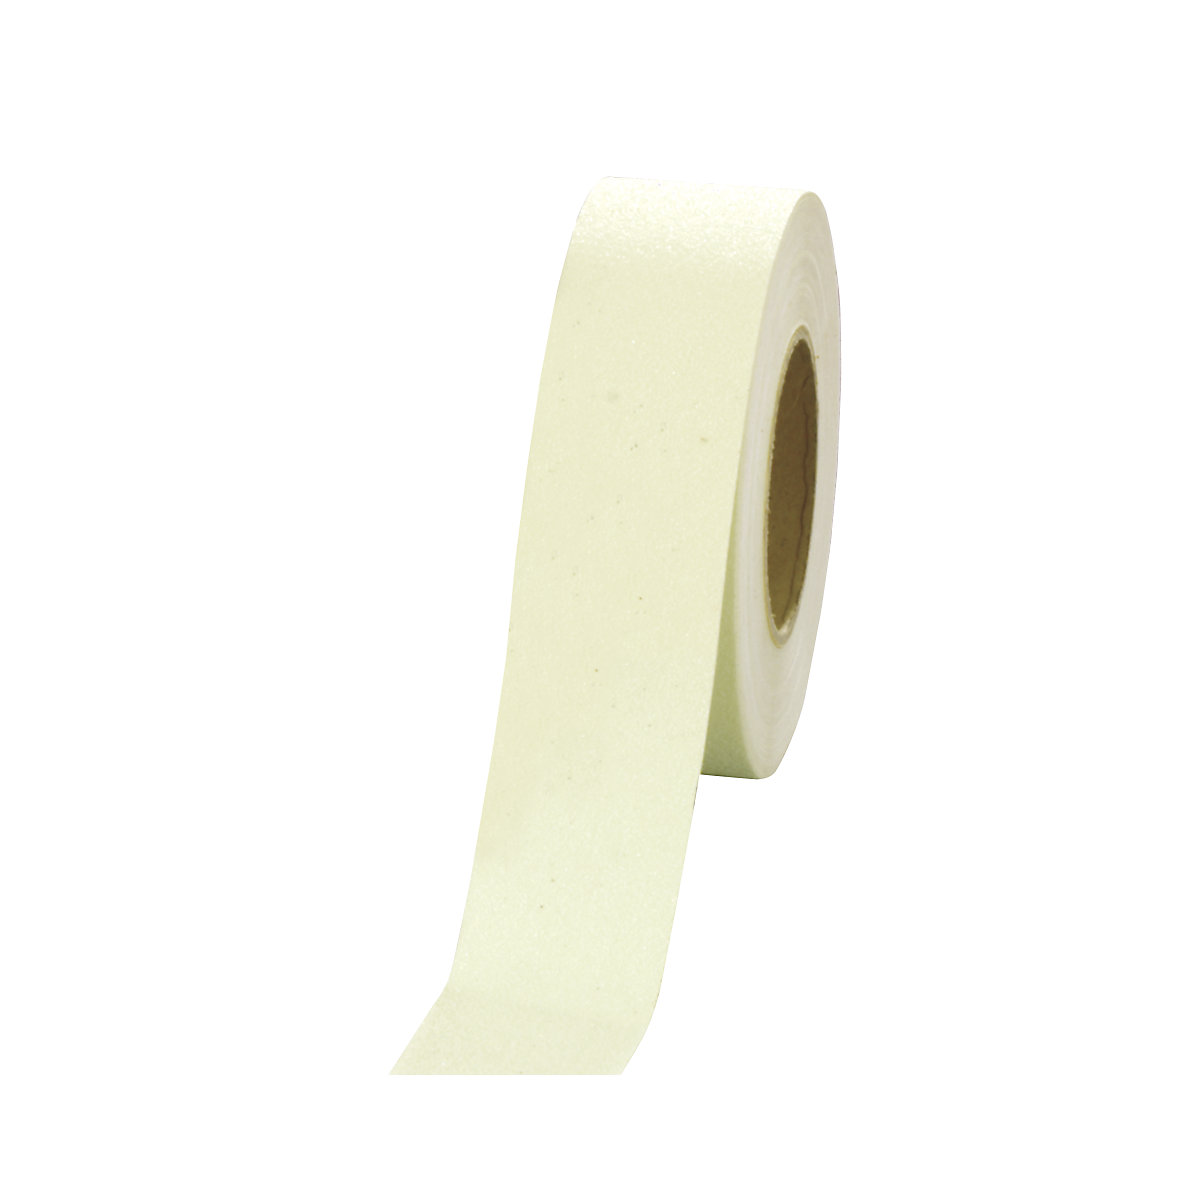 Non-slip tape, self-adhesive, width 50 mm, fluorescent, roll, pack of 1